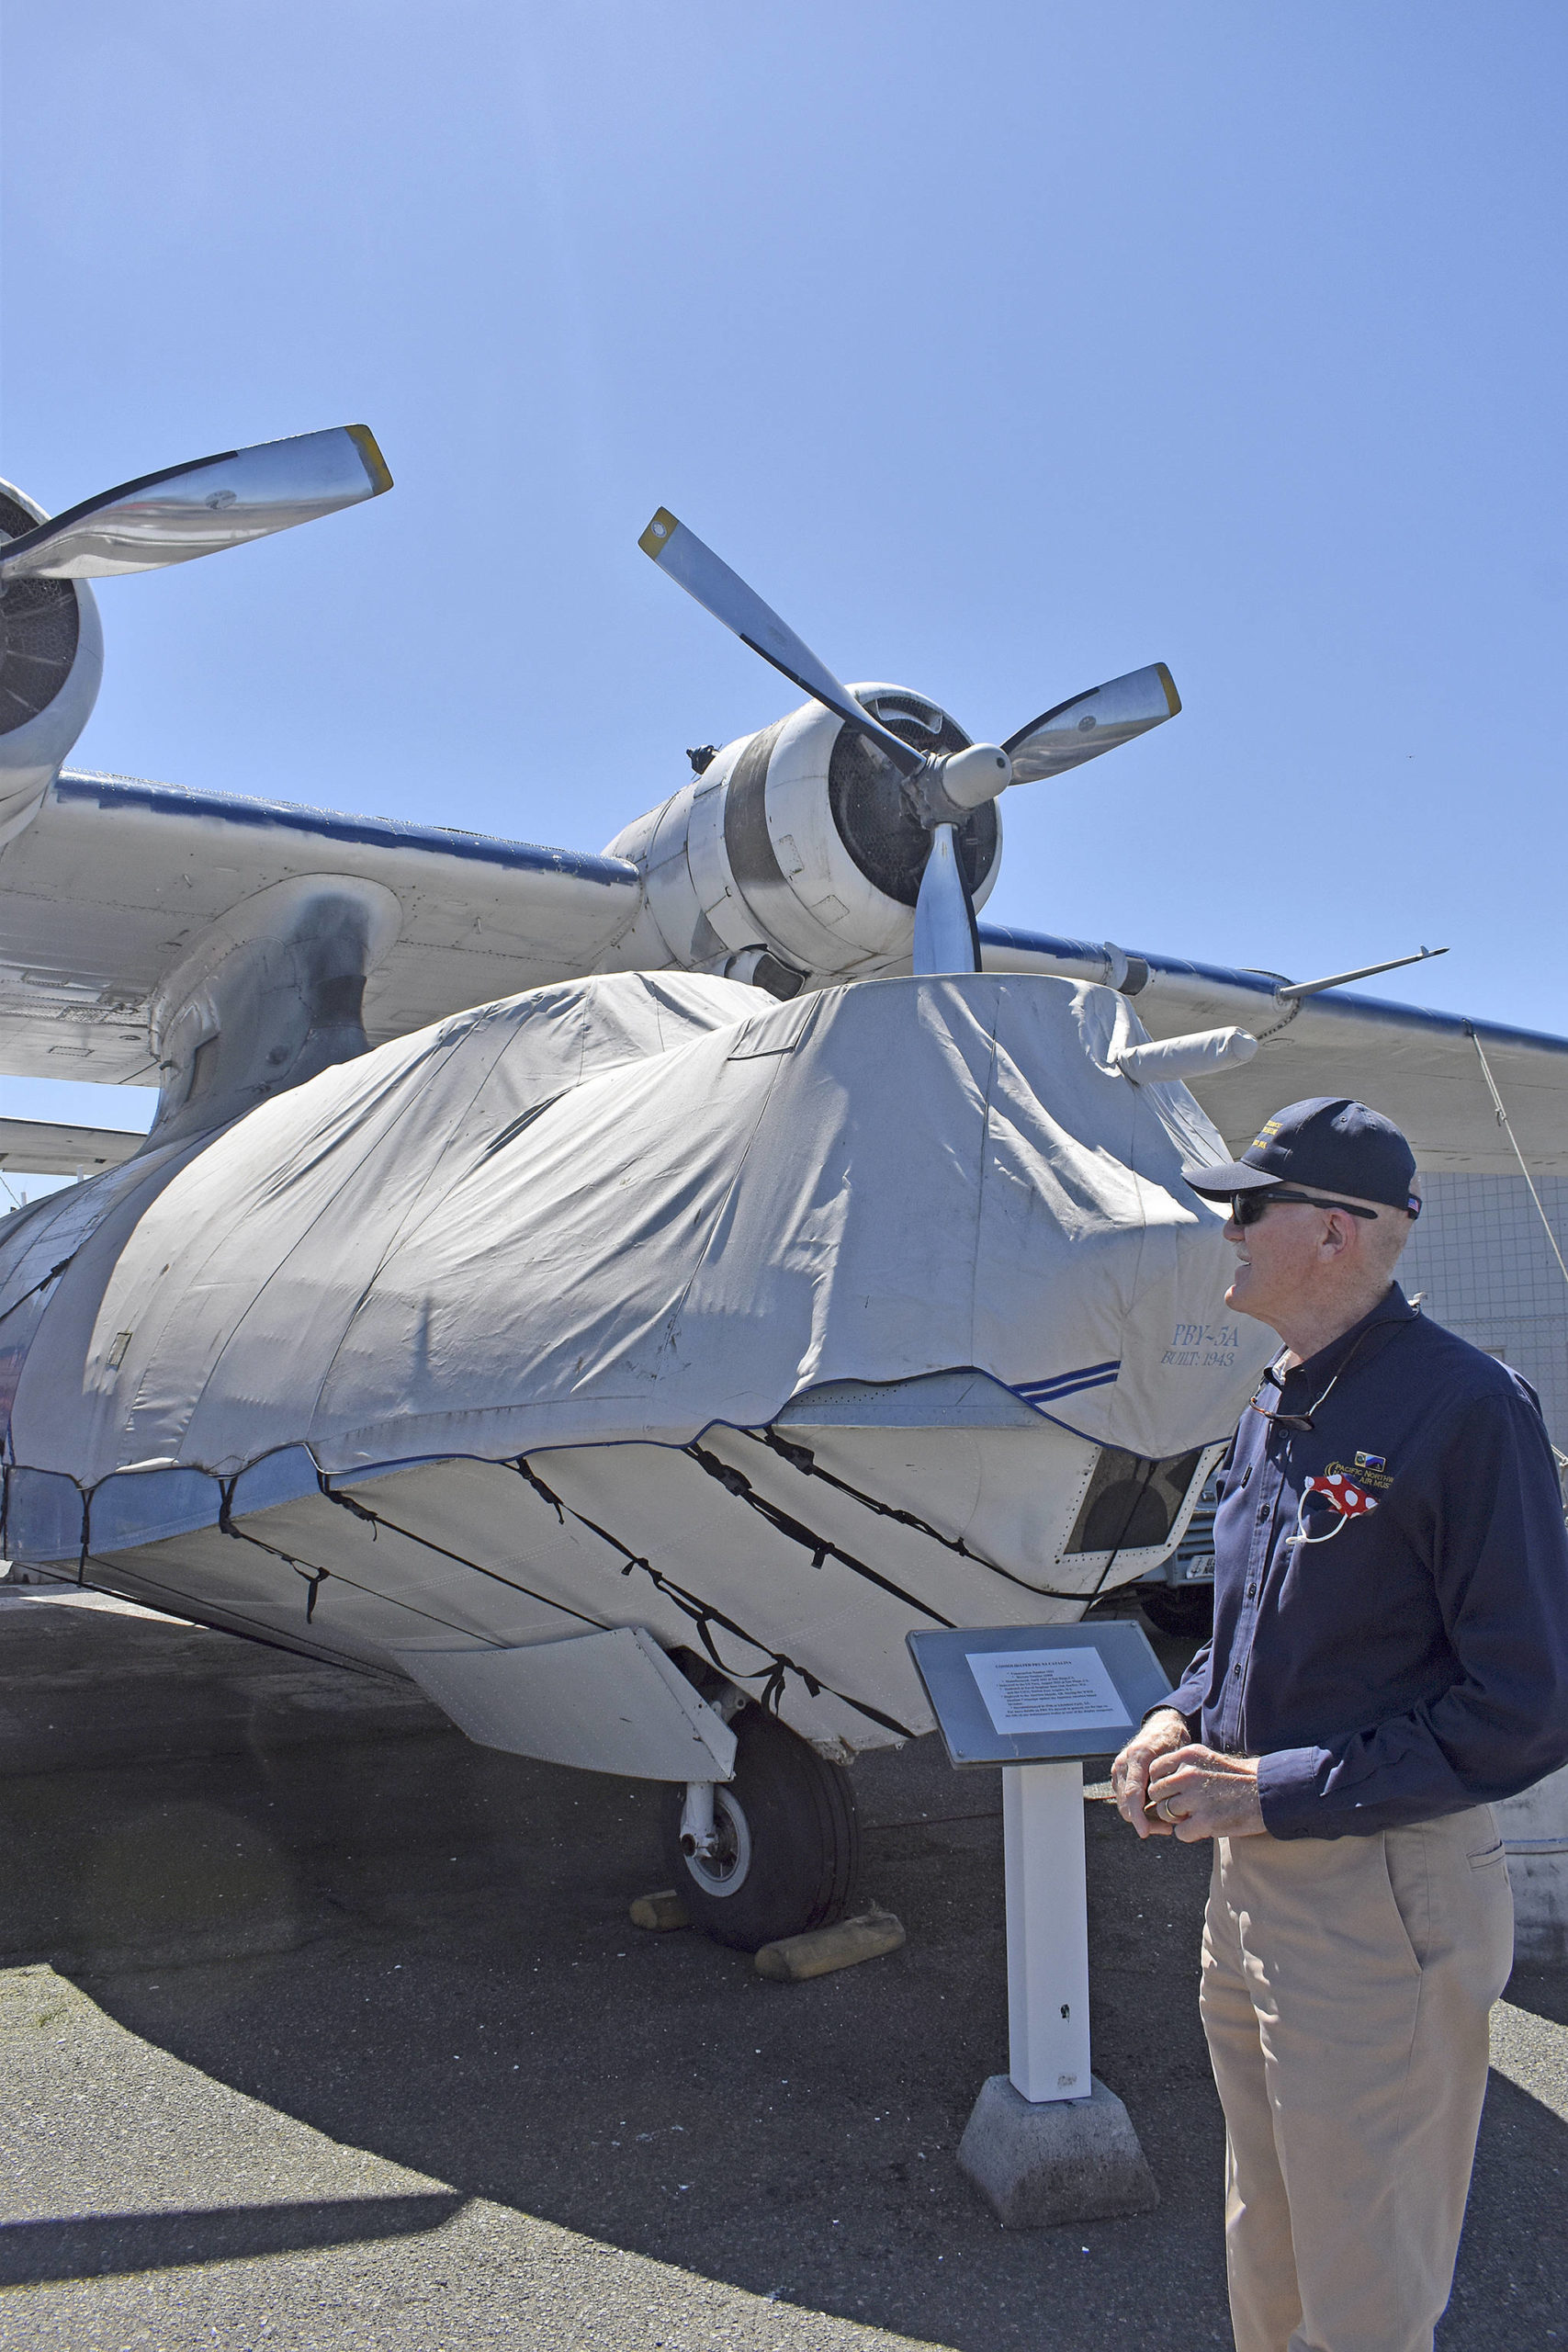 Pacific Northwest Naval Air Museum President Wil Shellenberger is hoping to find more volunteer docents so the museum can show off the PBY-5A Catalina aircraft’s interior to the public. Photo by Emily Gilbert/Whidbey News-Times.